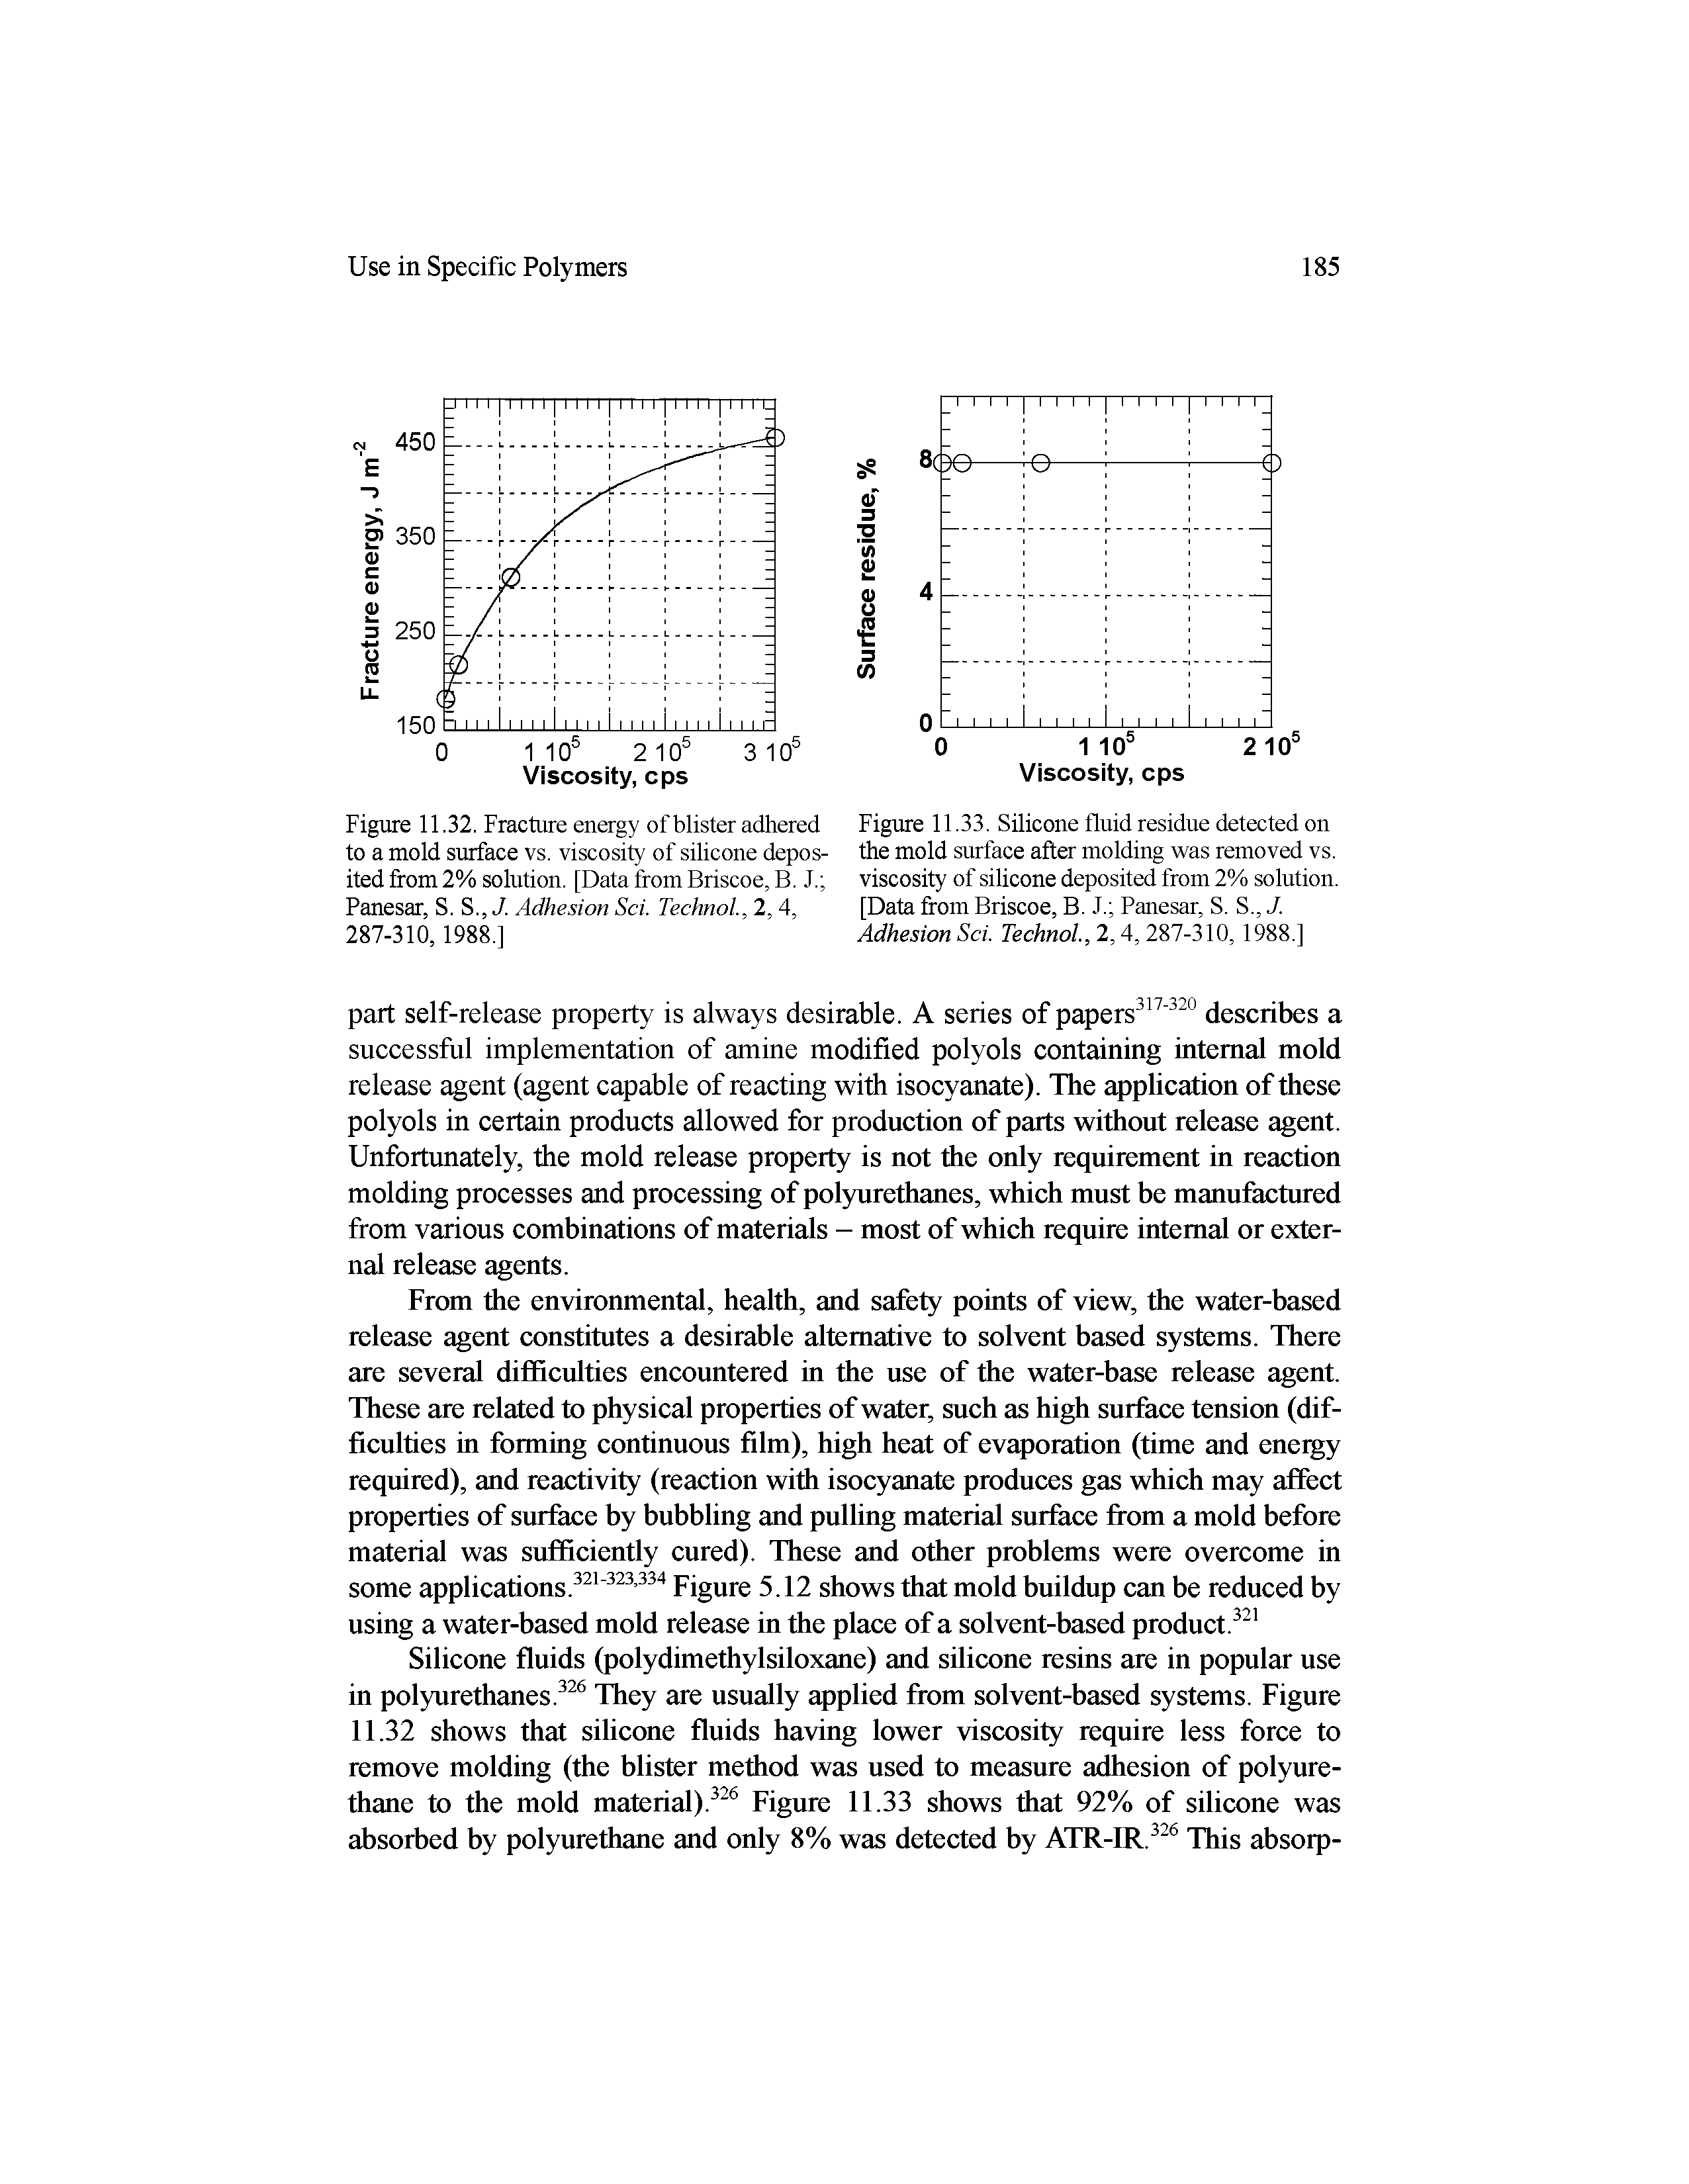 Figure 11.32. Fracture energy of blister adhered Figure 11.33. Silicone fluid residue detected on to a mold surface vs. viscosity of shicone depos- the mold surface after molding was removed vs. ited from 2% soluhon. [Data from Briscoe, B. J. viscosity of silicone deposited from 2% solution. Panesar, S. S., J. Adhesion Sci. Technol., 2,4, [Data from Briscoe, B. J. Panesar, S. S., J. 287-310, 1988.] Adhesion Sci. Technol., 2,4, 287-310, 1988.]...